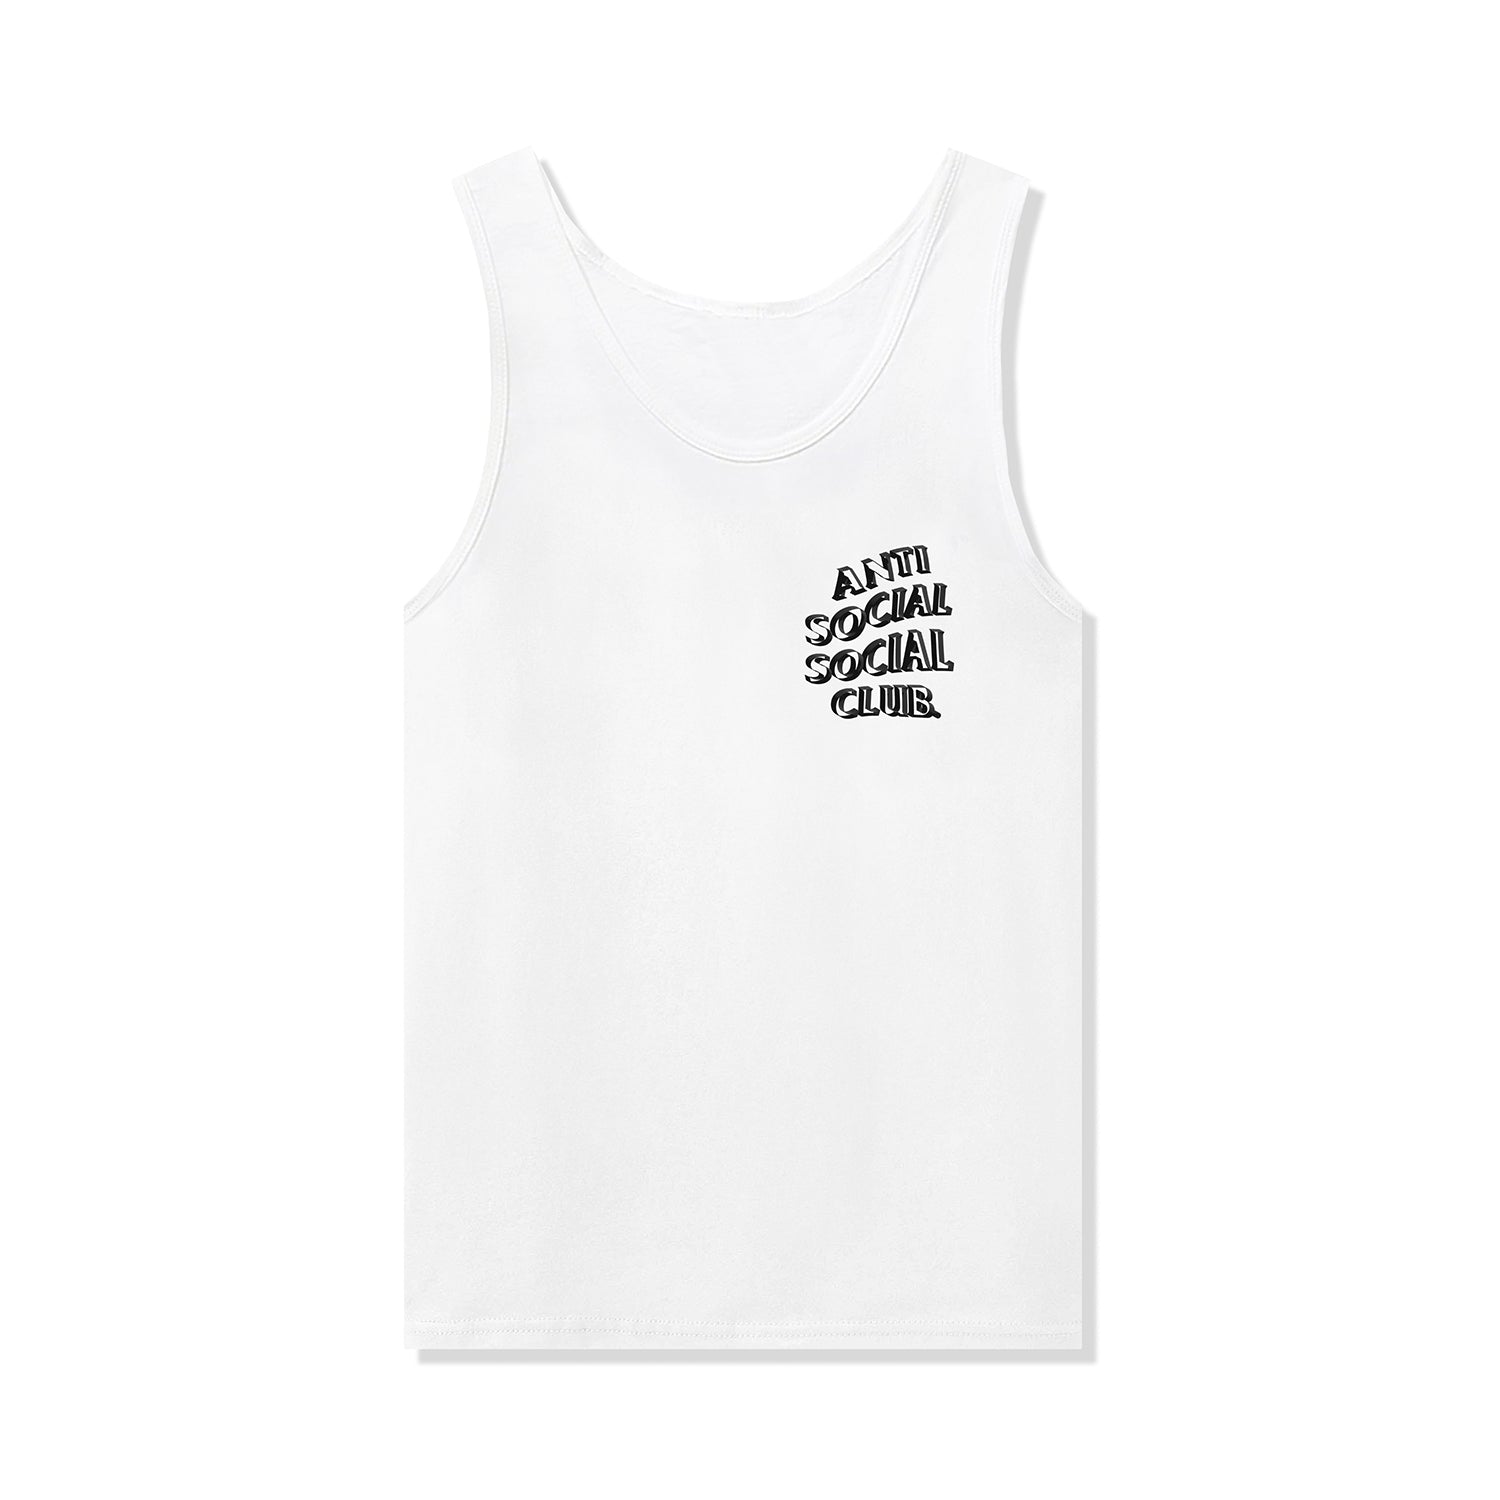 White tank, small ASSC graphic, front